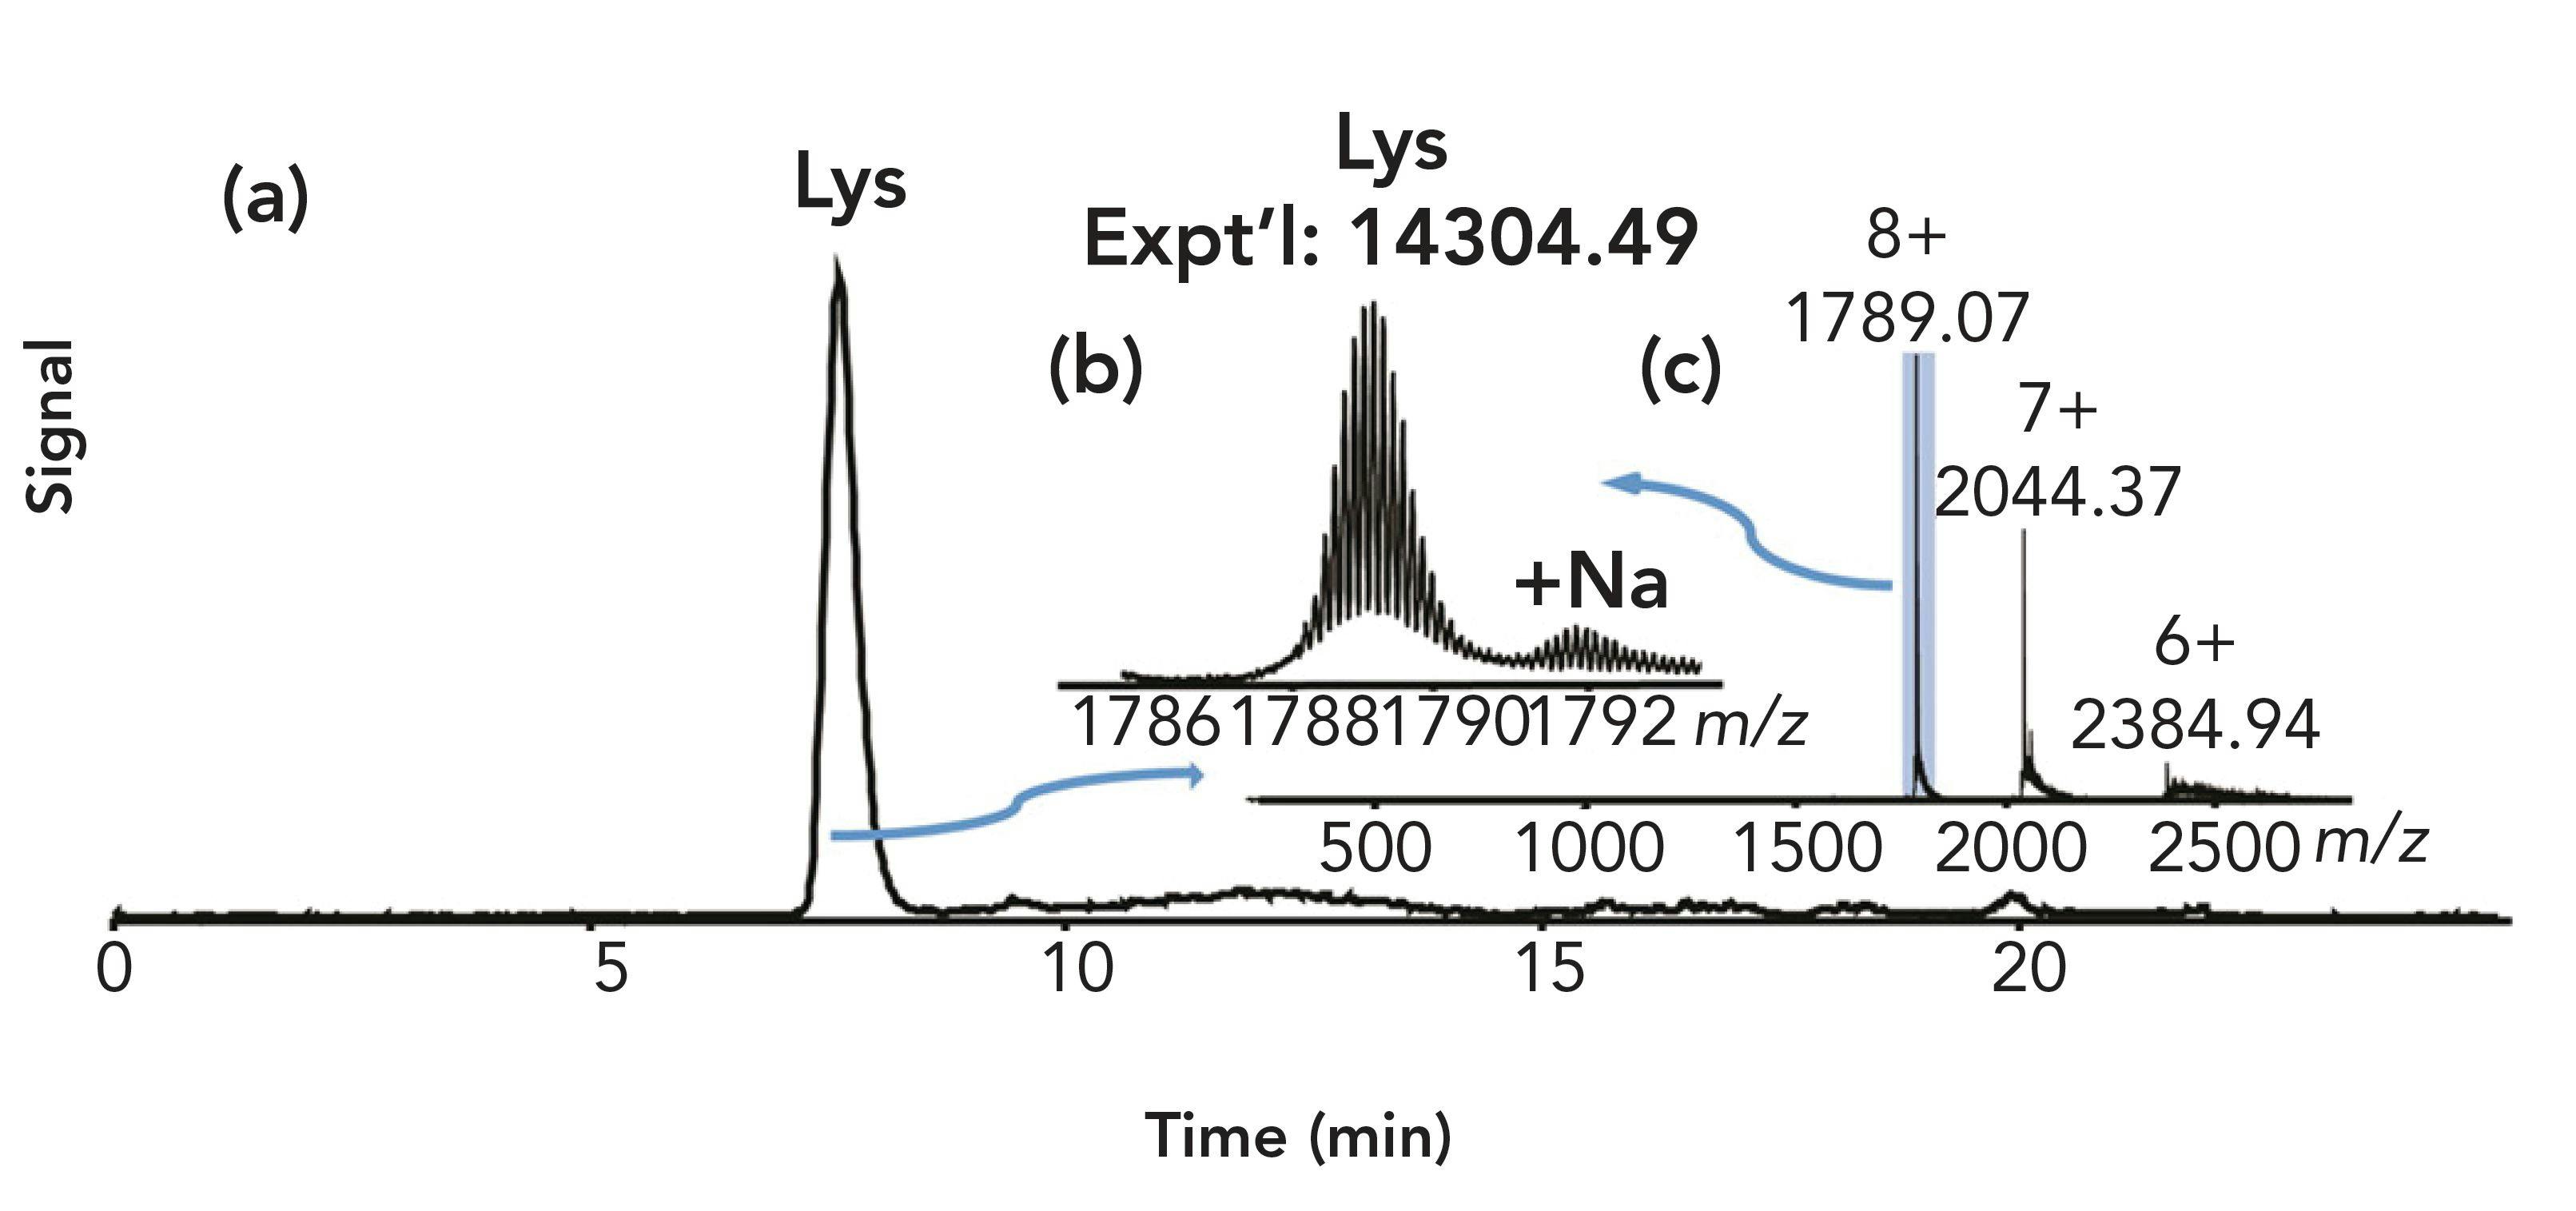 FIGURE 2: HIC–MS of lysozyme on a PolyHEXYL A capillary. (a) The total ion chromatogram (TIC). (b) Zoom-in on mass spectrum of charge state 8+, showing the correct mass for lysozyme. (c) Mass spectrum. Figure adapted from reference (5).